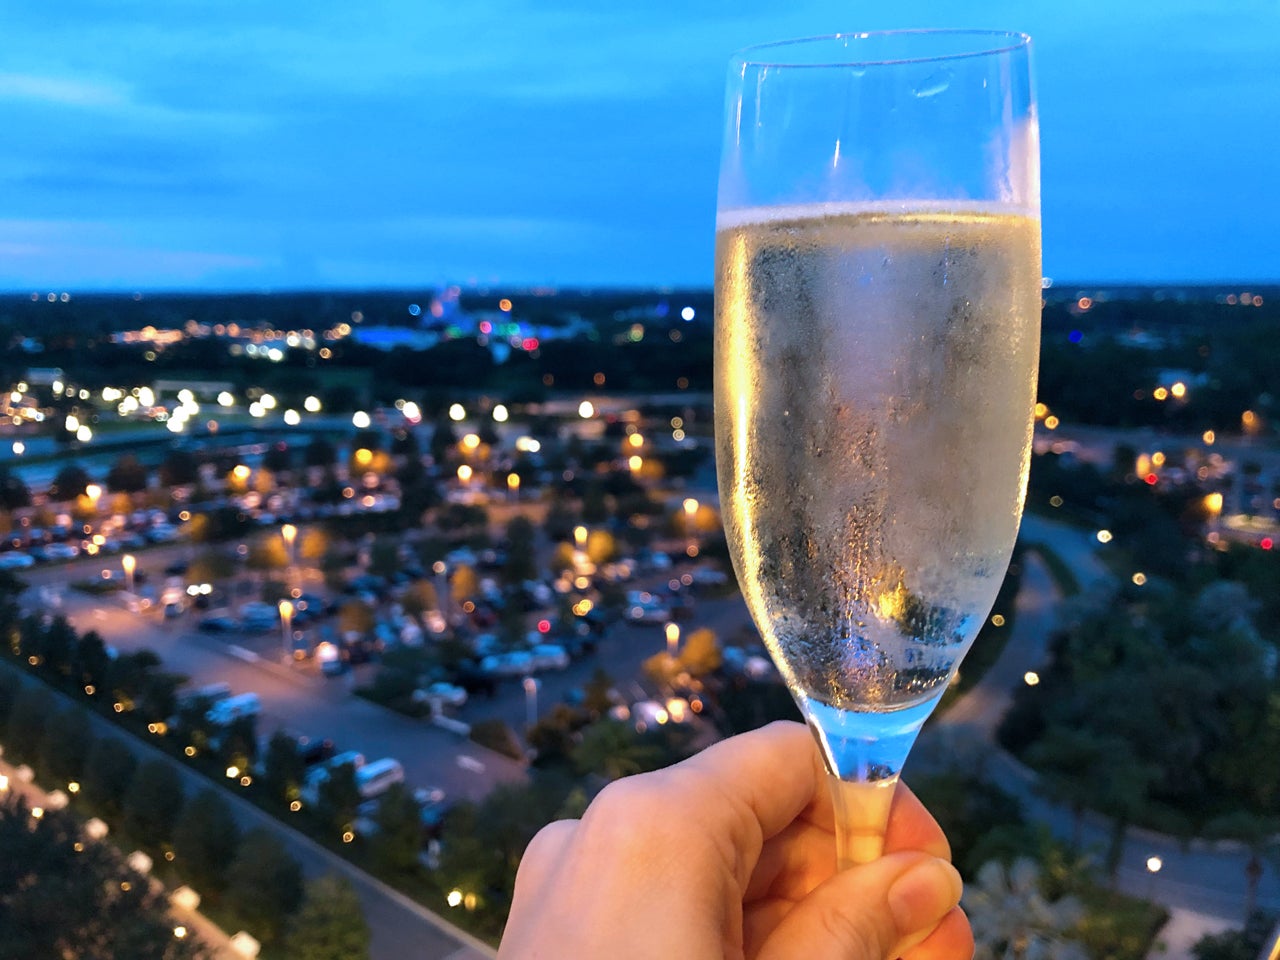 Cheers to Club Level at Disney's Contemporary